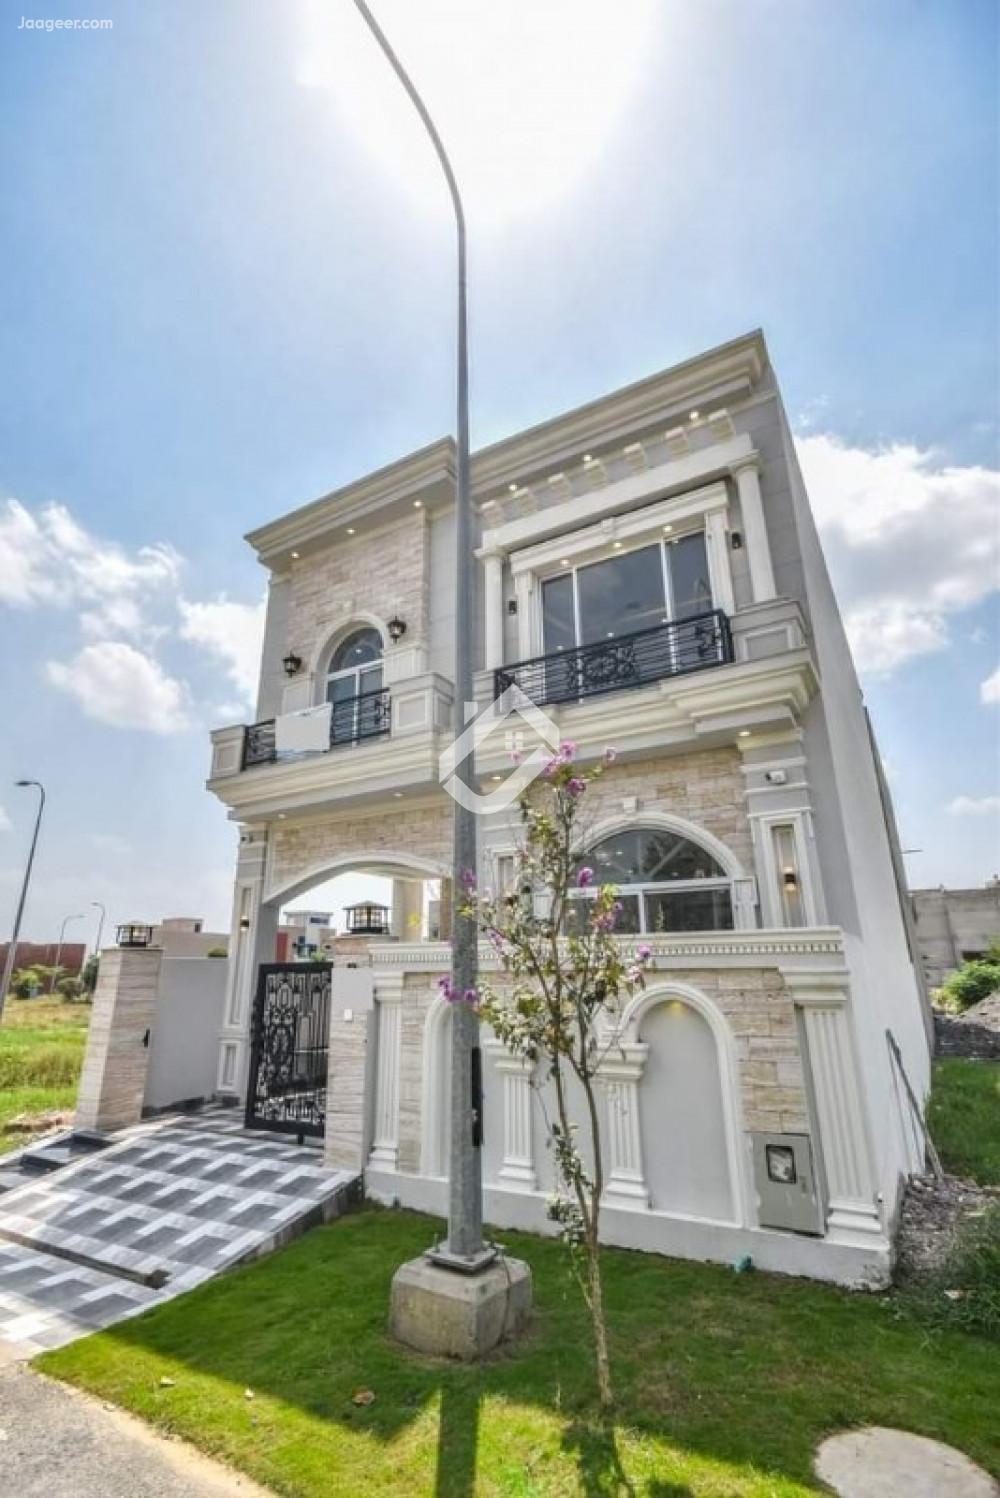 Main image 5 Marla Double Storey House For Sale In DHA Phase 9   DHA Phase 9, Lahore